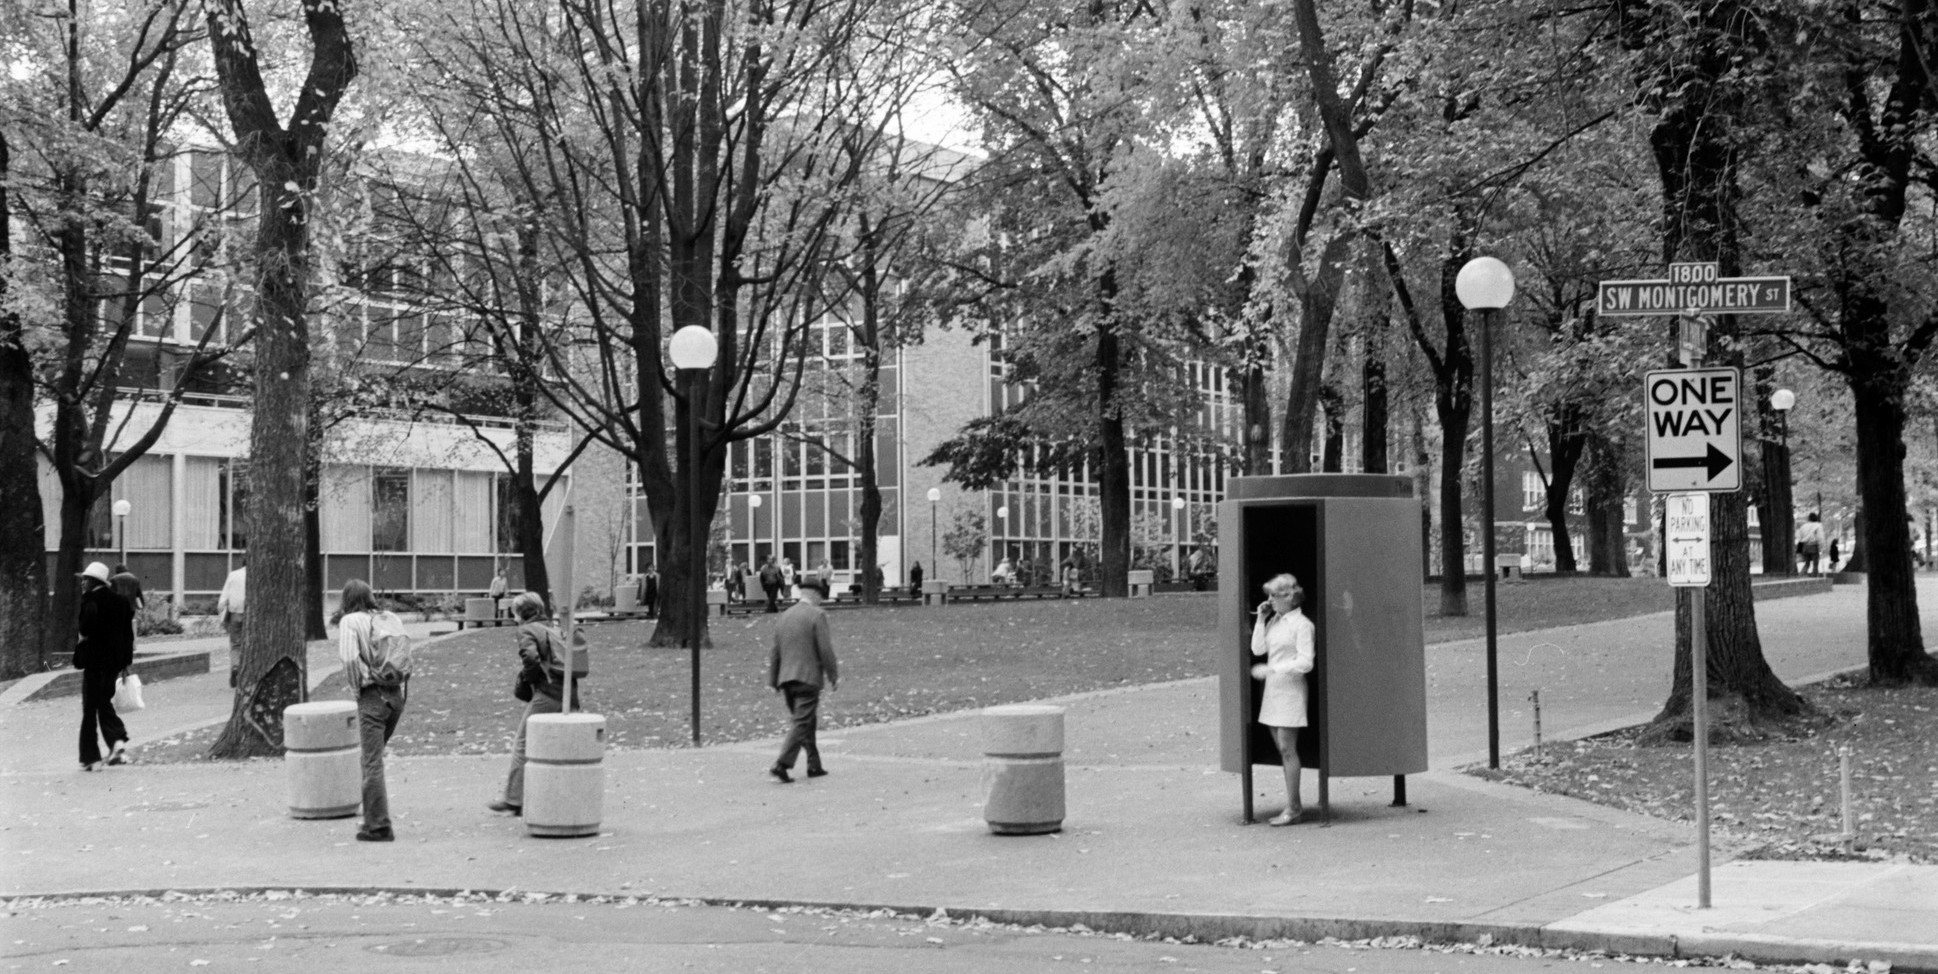 Students on campus in 1972